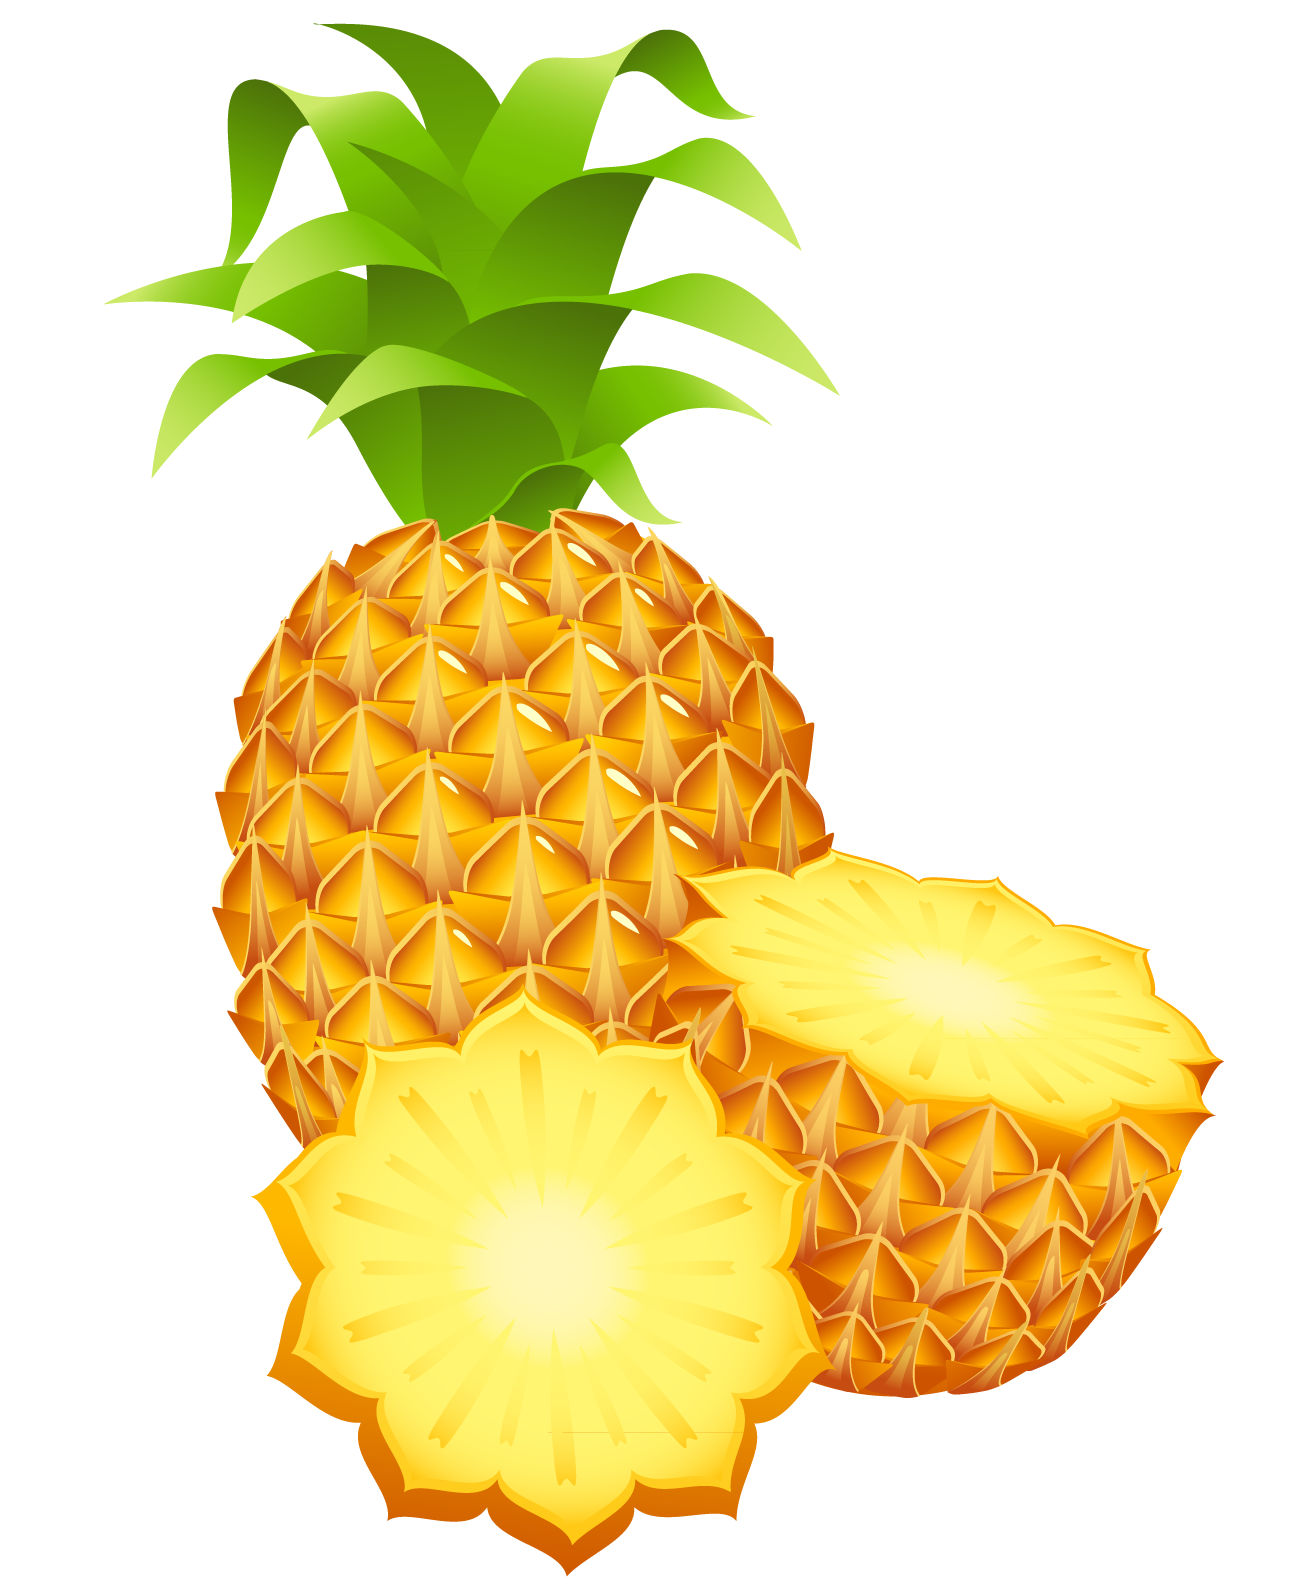 Pineapple images free pictures download clip art 2